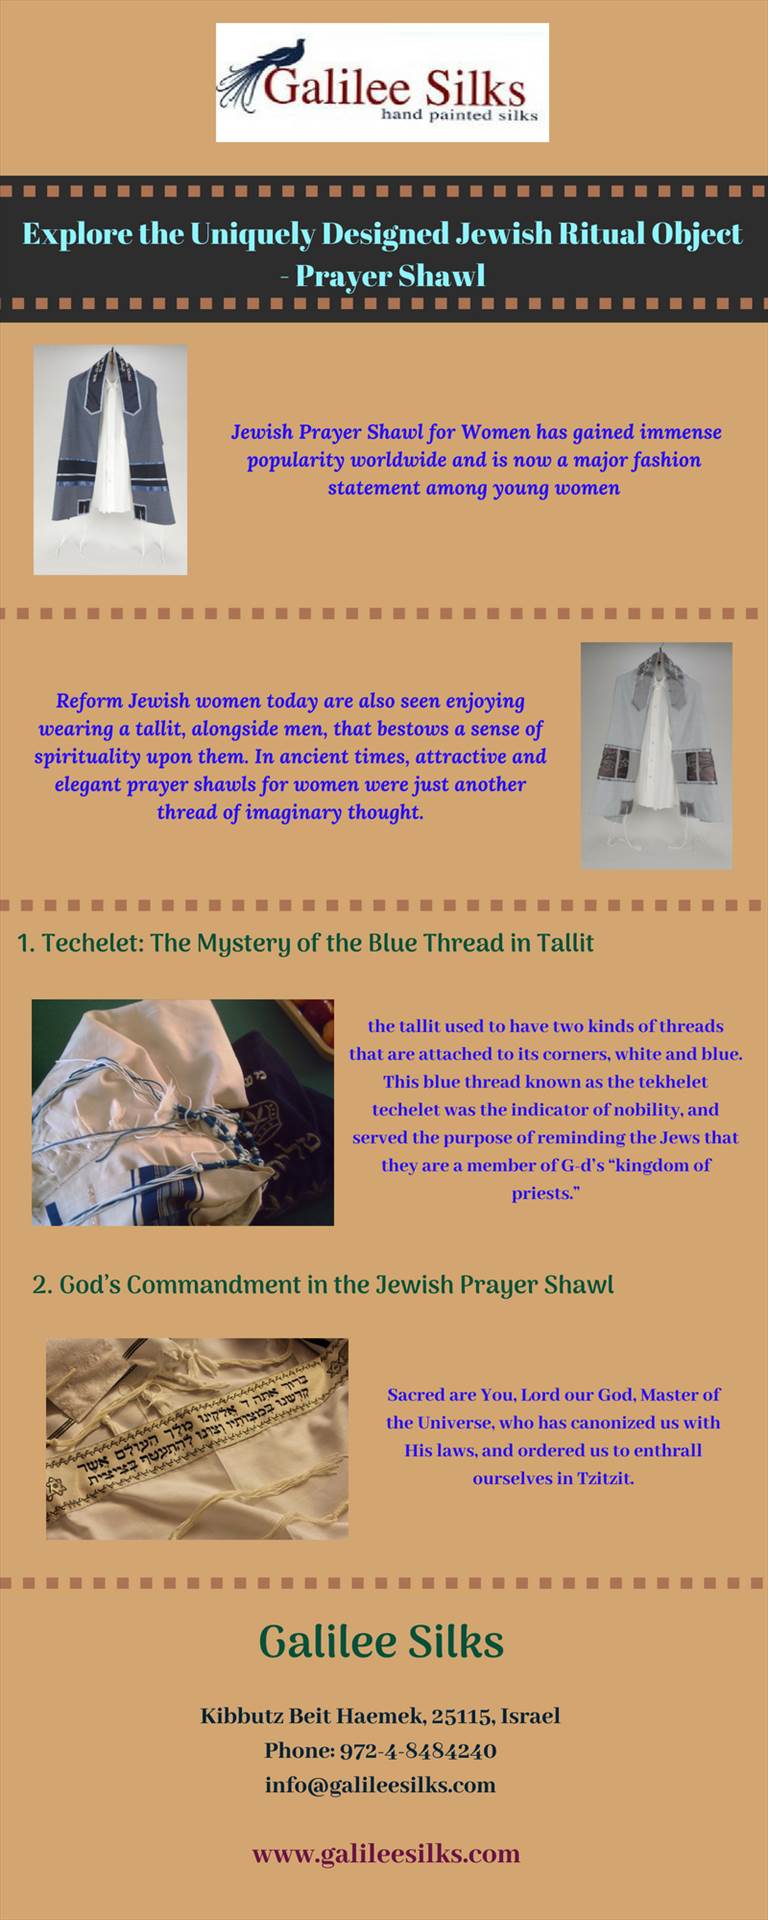 Explore the Uniquely Designed Jewish Ritual Object - Prayer Shawl.jpg The elegant Jewish women tallit was just another thread of imaginary thought. Know how they evolved into unique pieces and gained significant importance. For more details, visit this link: https://bit.ly/2ARIlpP by amramrafi